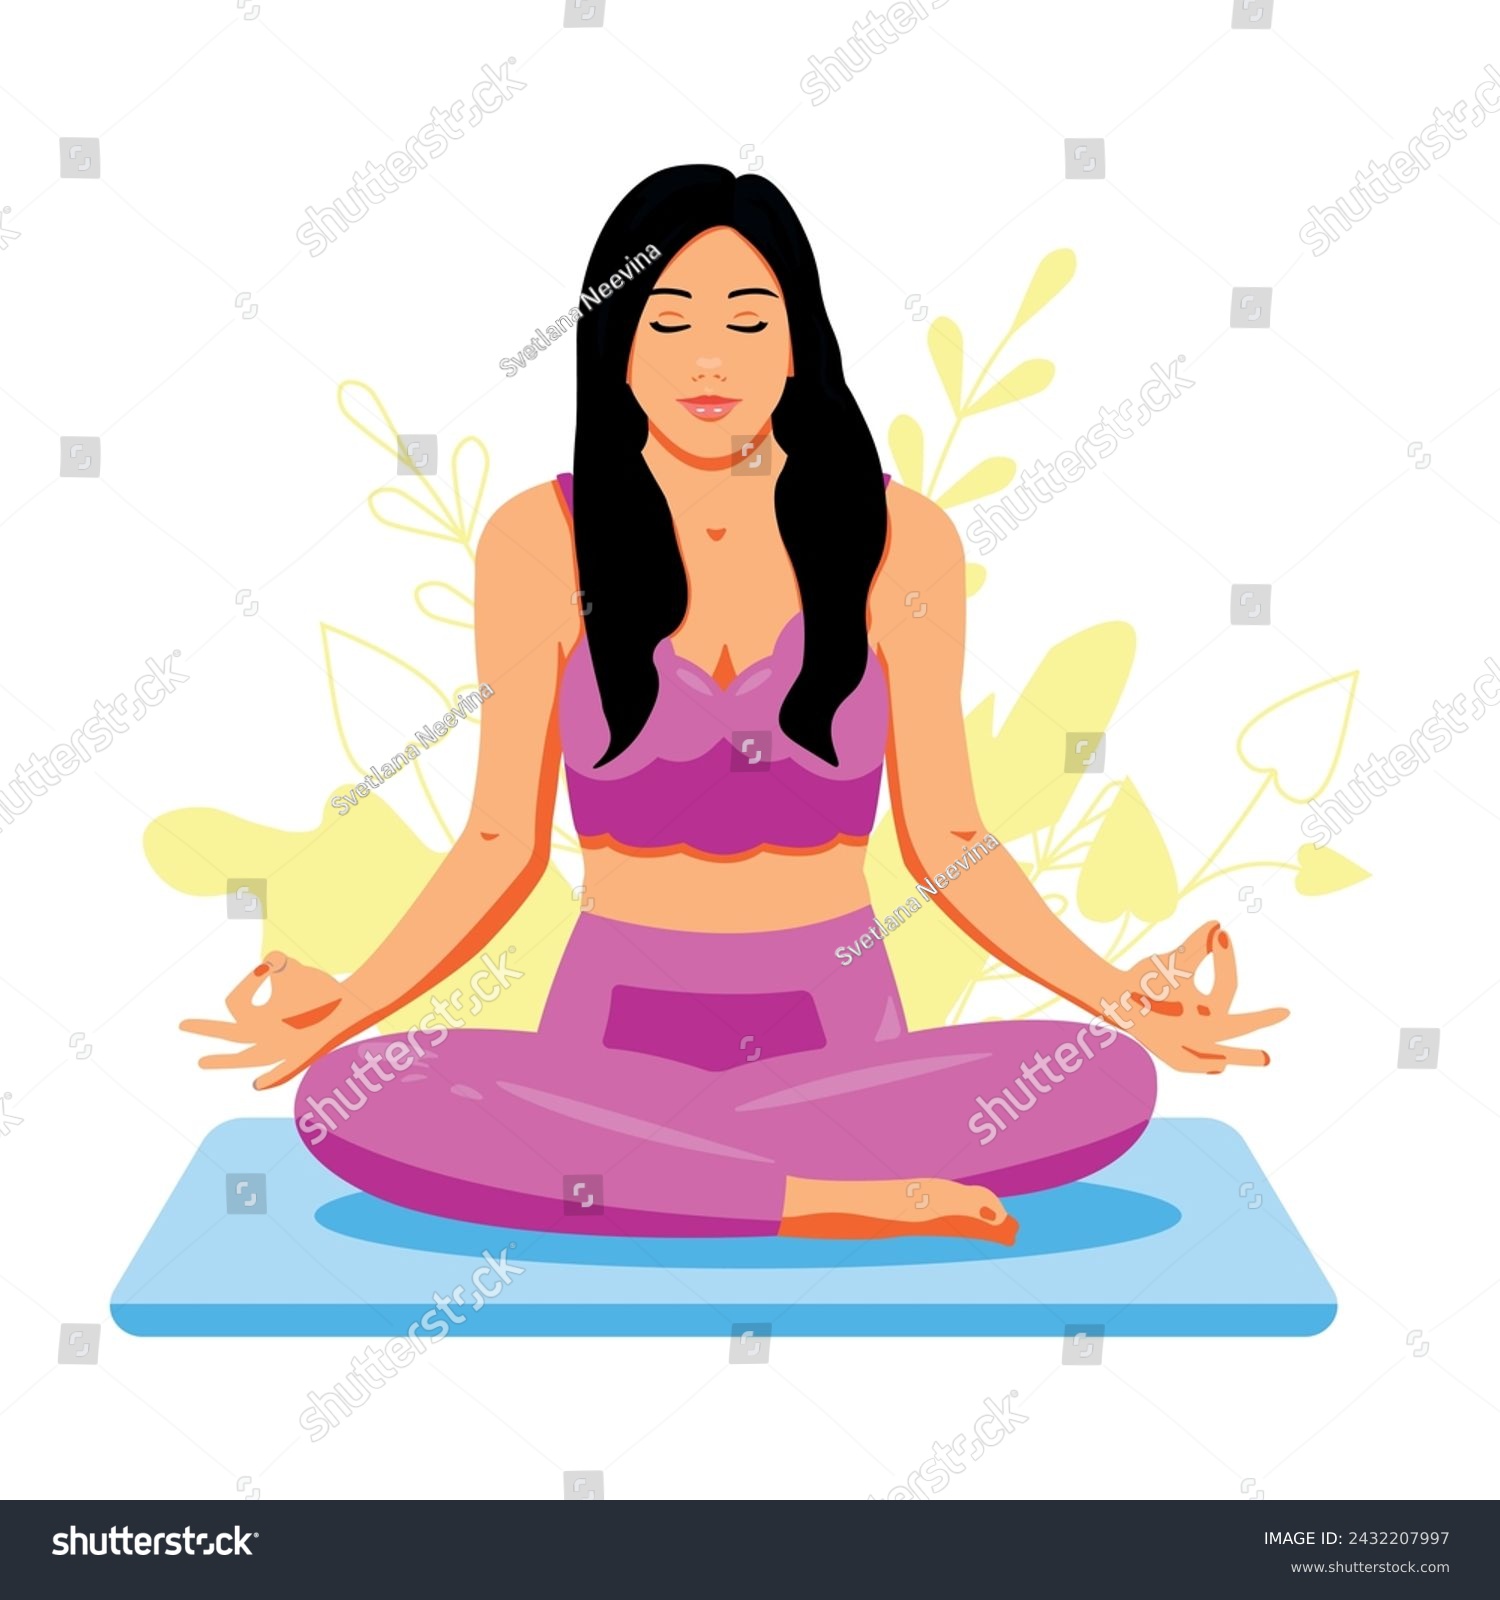 SVG of A brunette woman in a pink uniform does yoga while sitting in the lotus position. Take care of your mental health. Illustration for international yoga day. Element for web design, postcards. EPS10
 svg